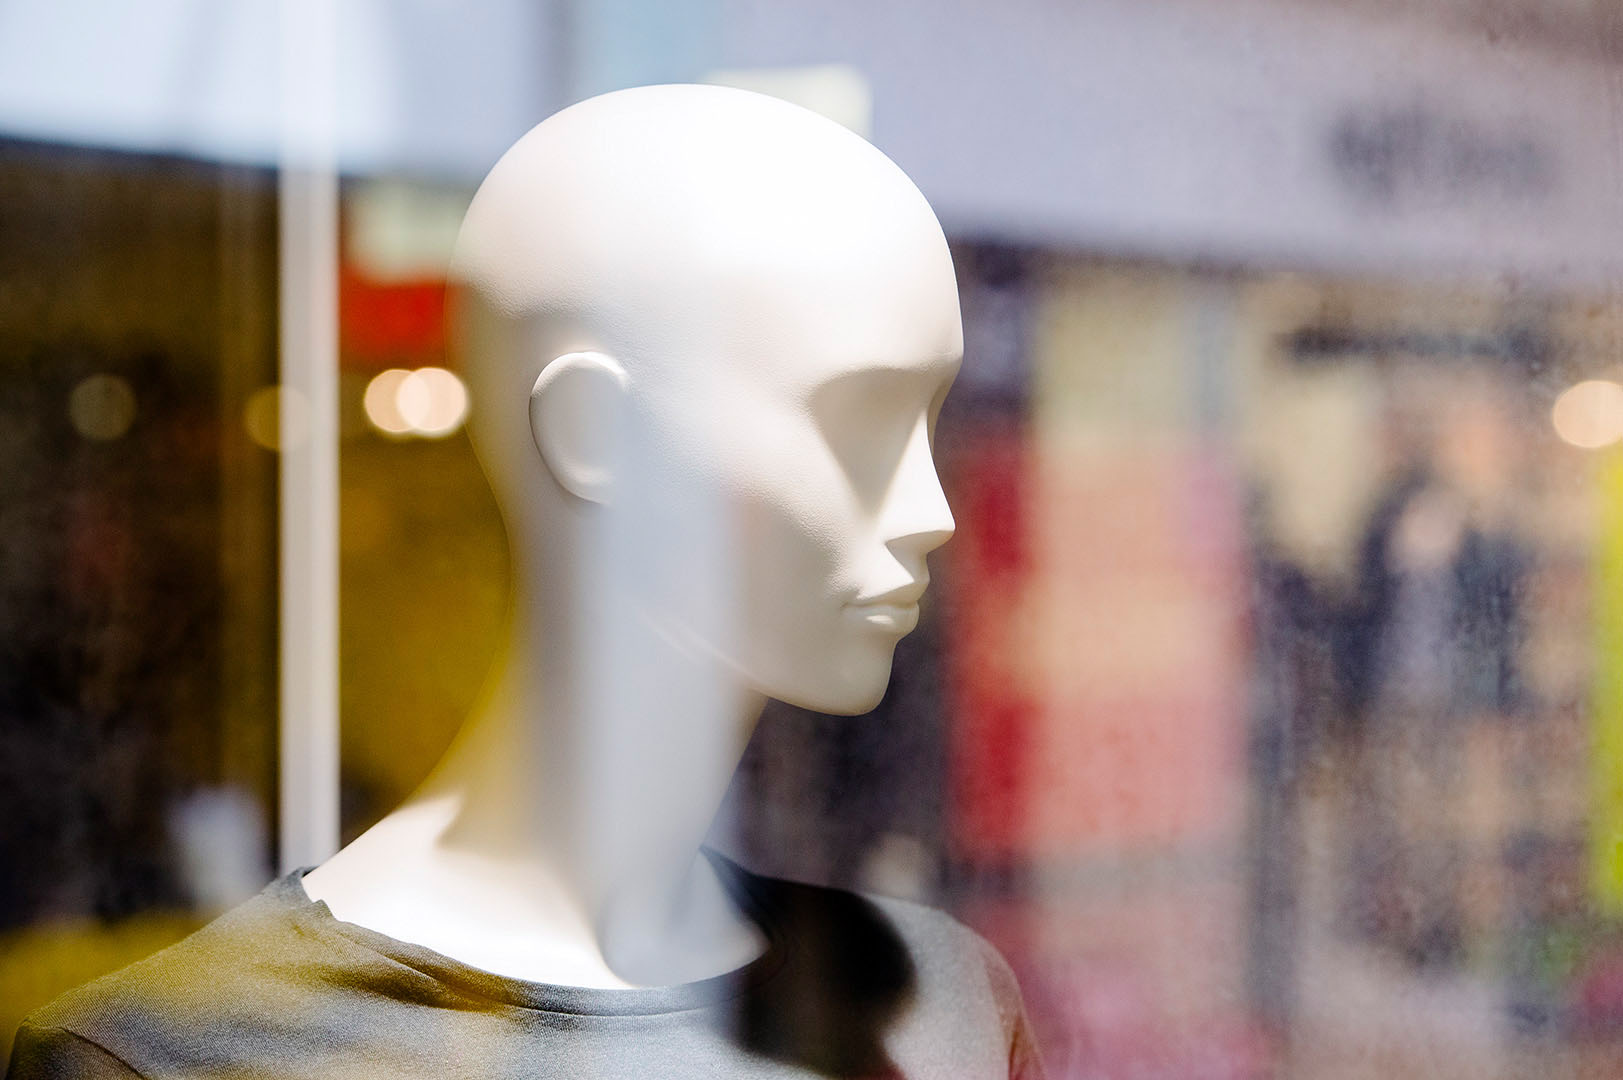 Shop mannequin looking to the right of frame